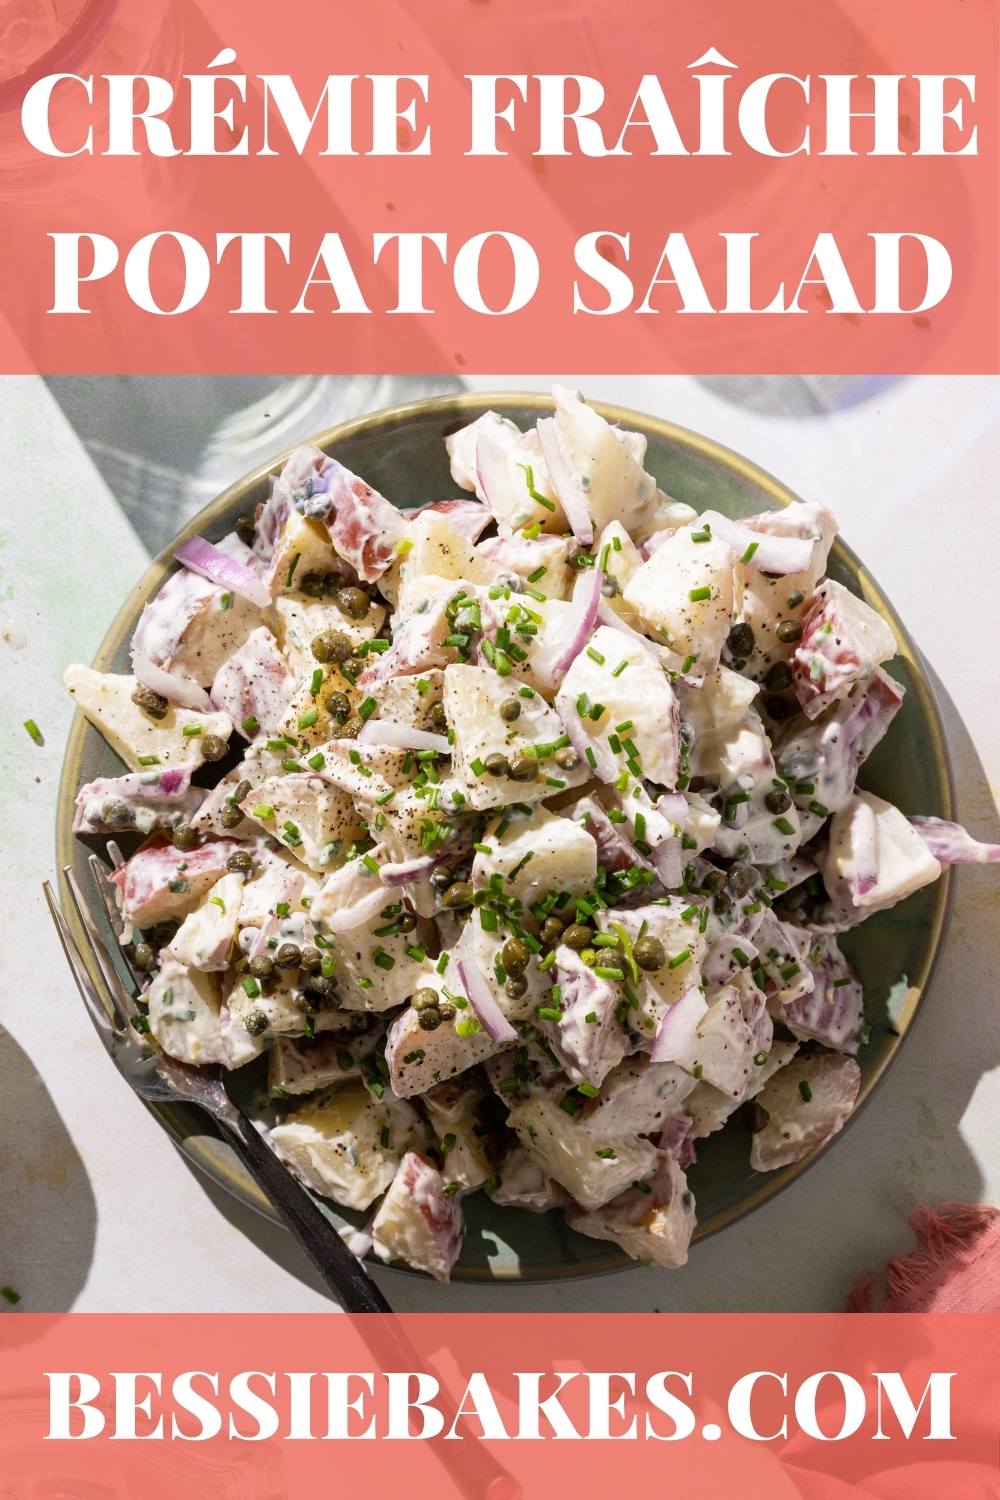 This luscious and tangy créme fraîche potato salad is guaranteed to liven up any potluck or cookout spread. via @bessiebakes